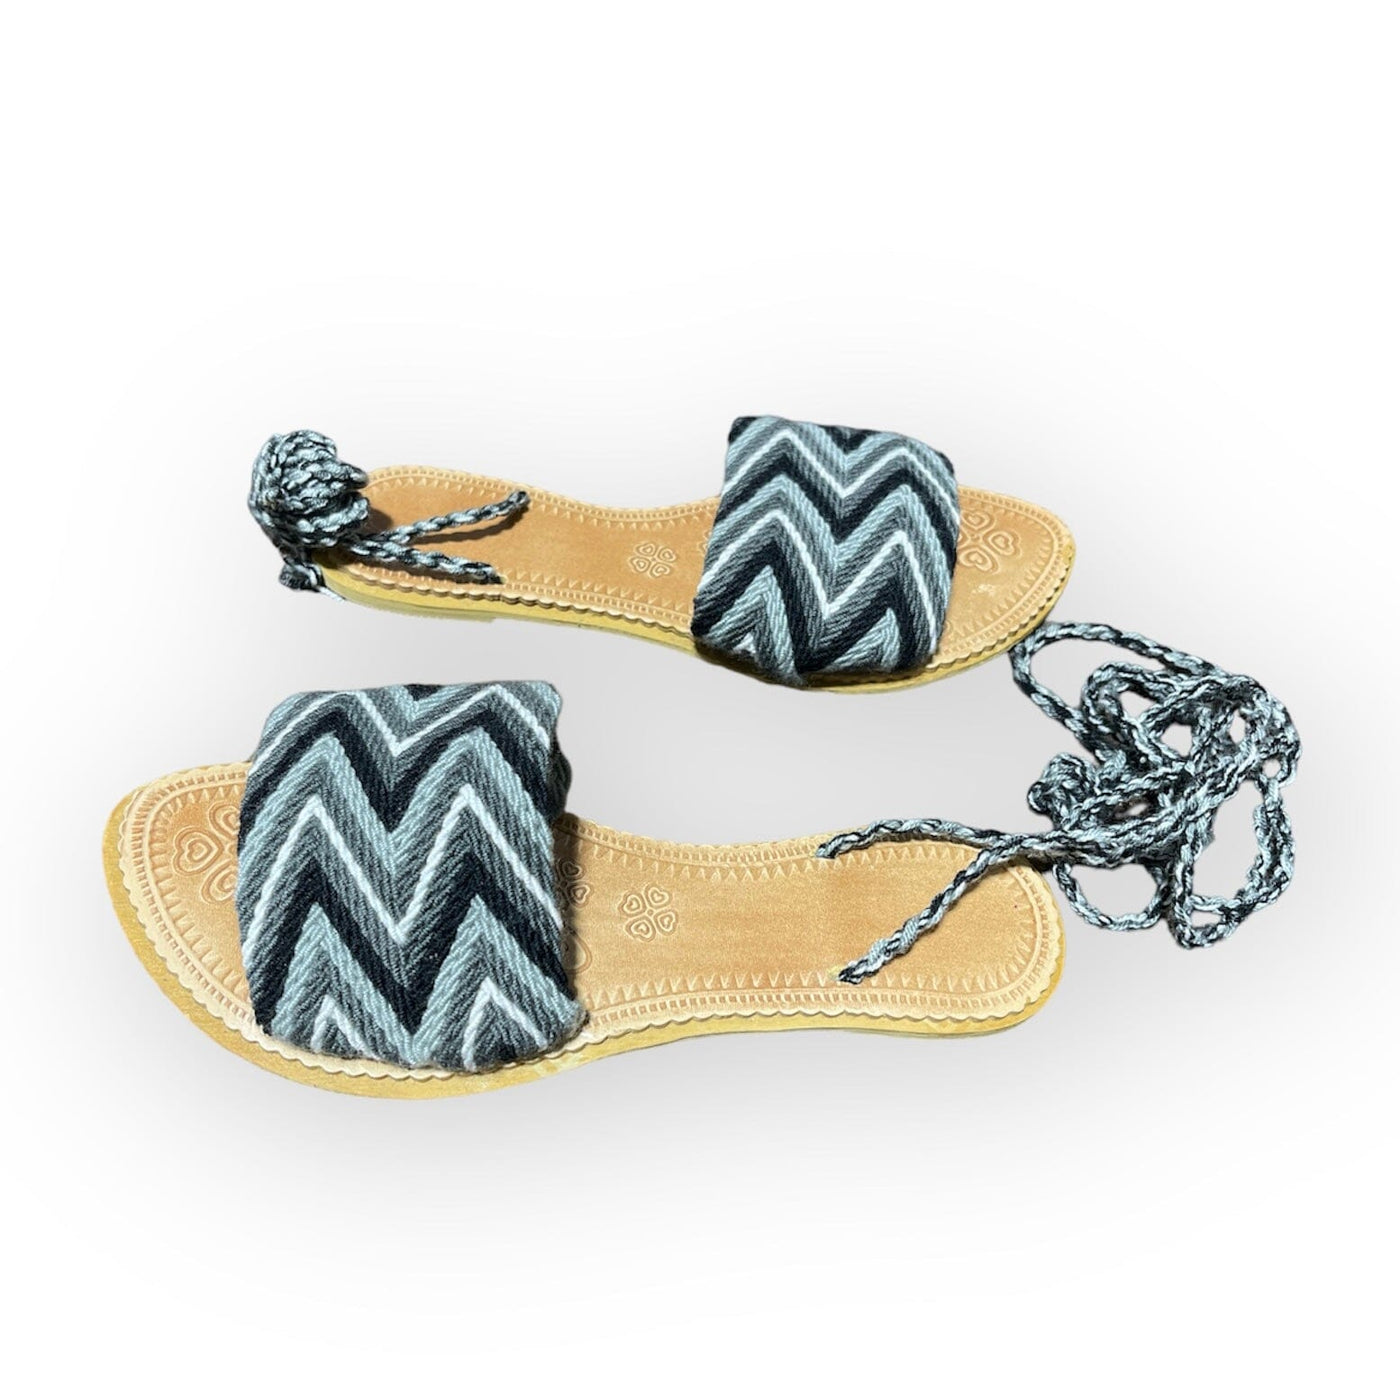 Shades of Gray Lace up Sandals | Woven Summer Shoes Summer Sandals 